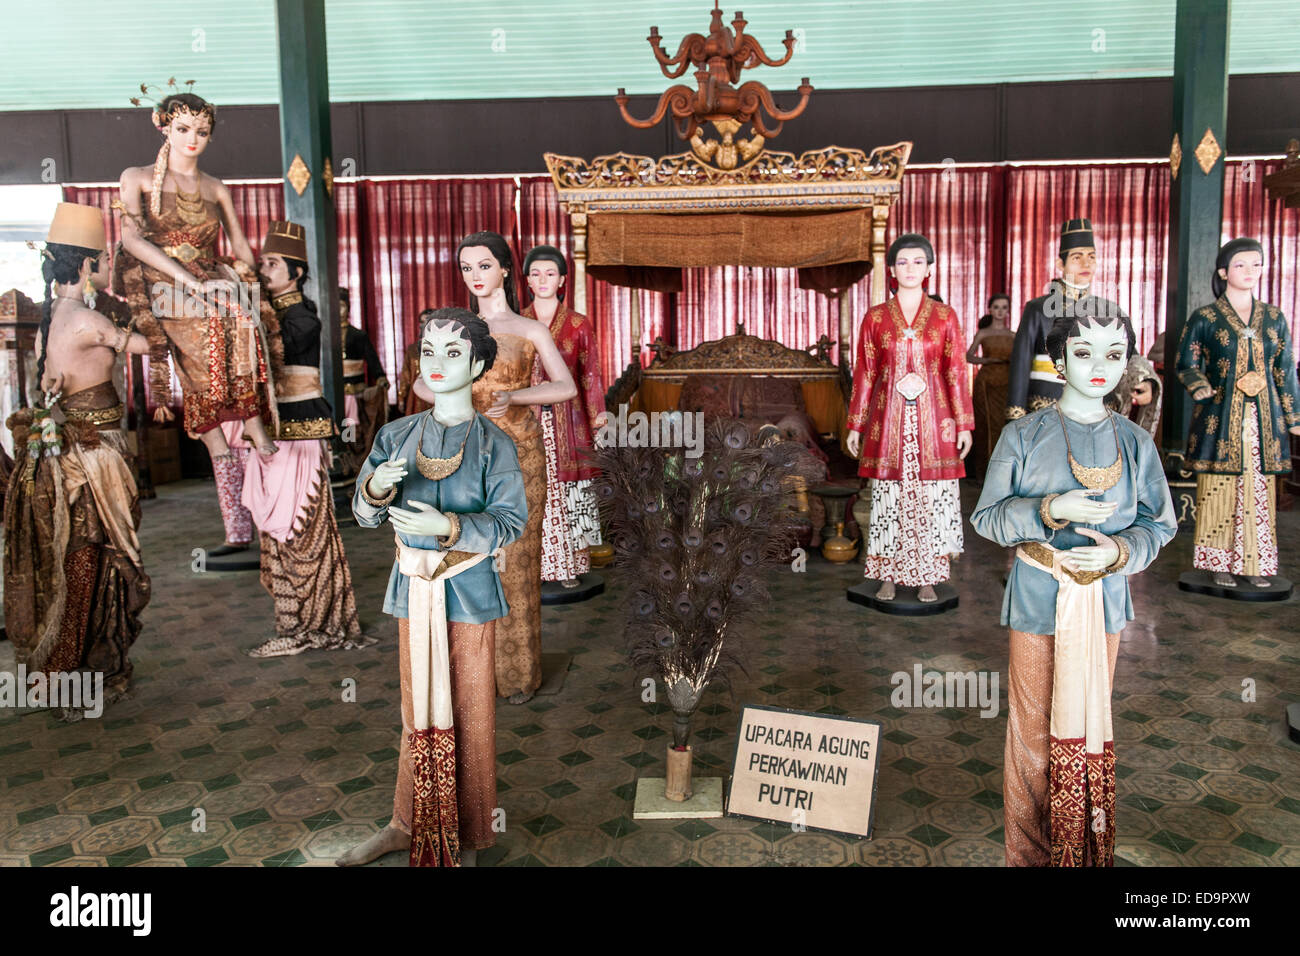 Historical figures in traditional outfits on display in the museum of the Yogyakarta Kraton (royal palace) in Java, Indonesia. Stock Photo